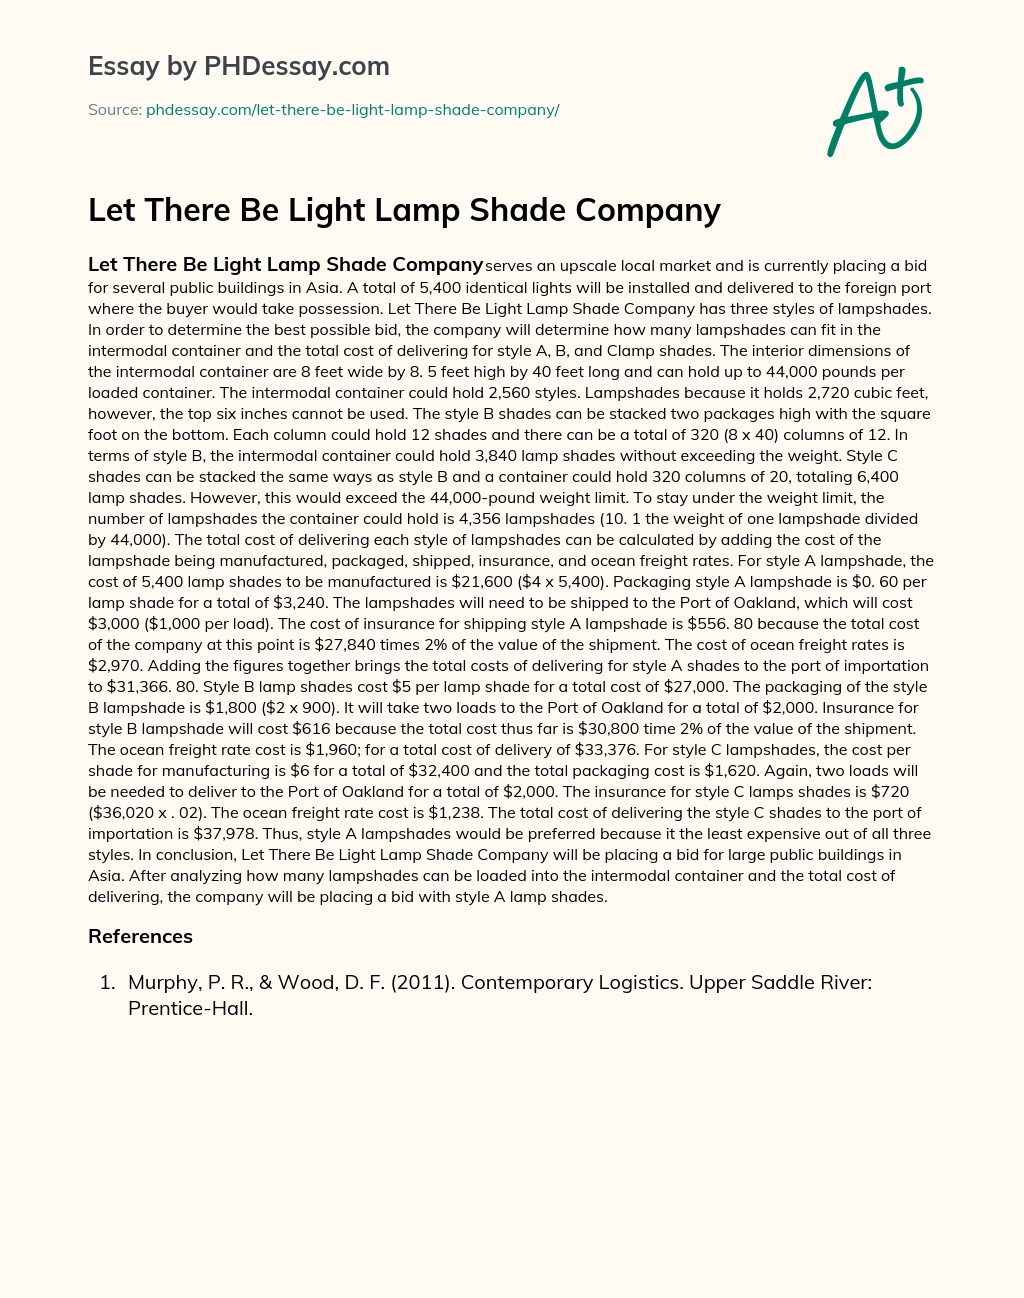 Let There Be Light Lamp Shade Company essay